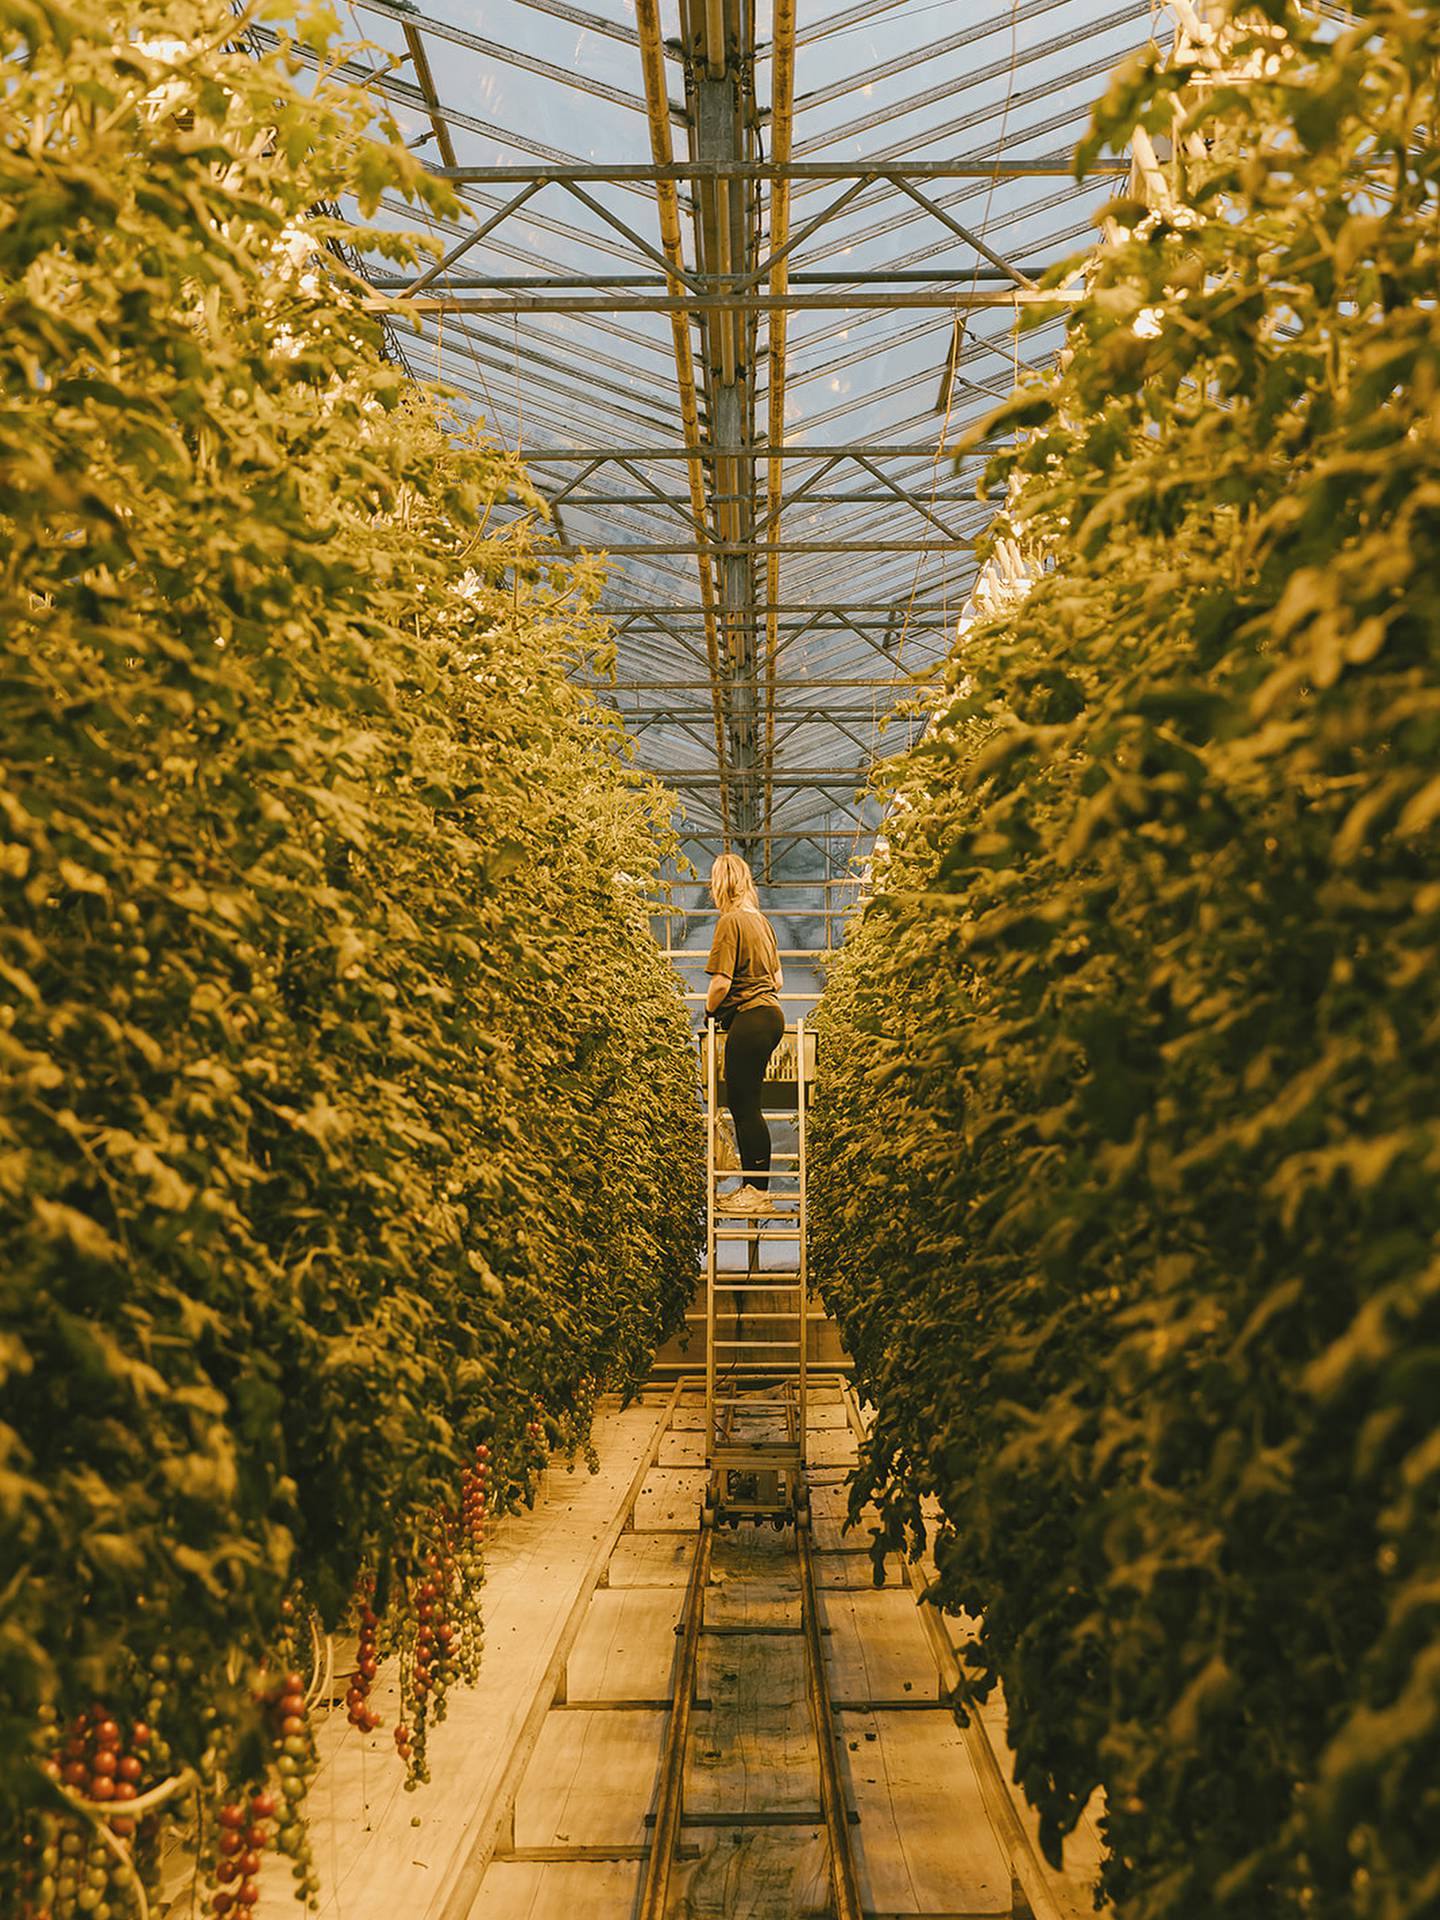 The outside view of the geothermal-powered Friðheimar Greenhouse, which provides Iceland with 40% of its tomatoes.